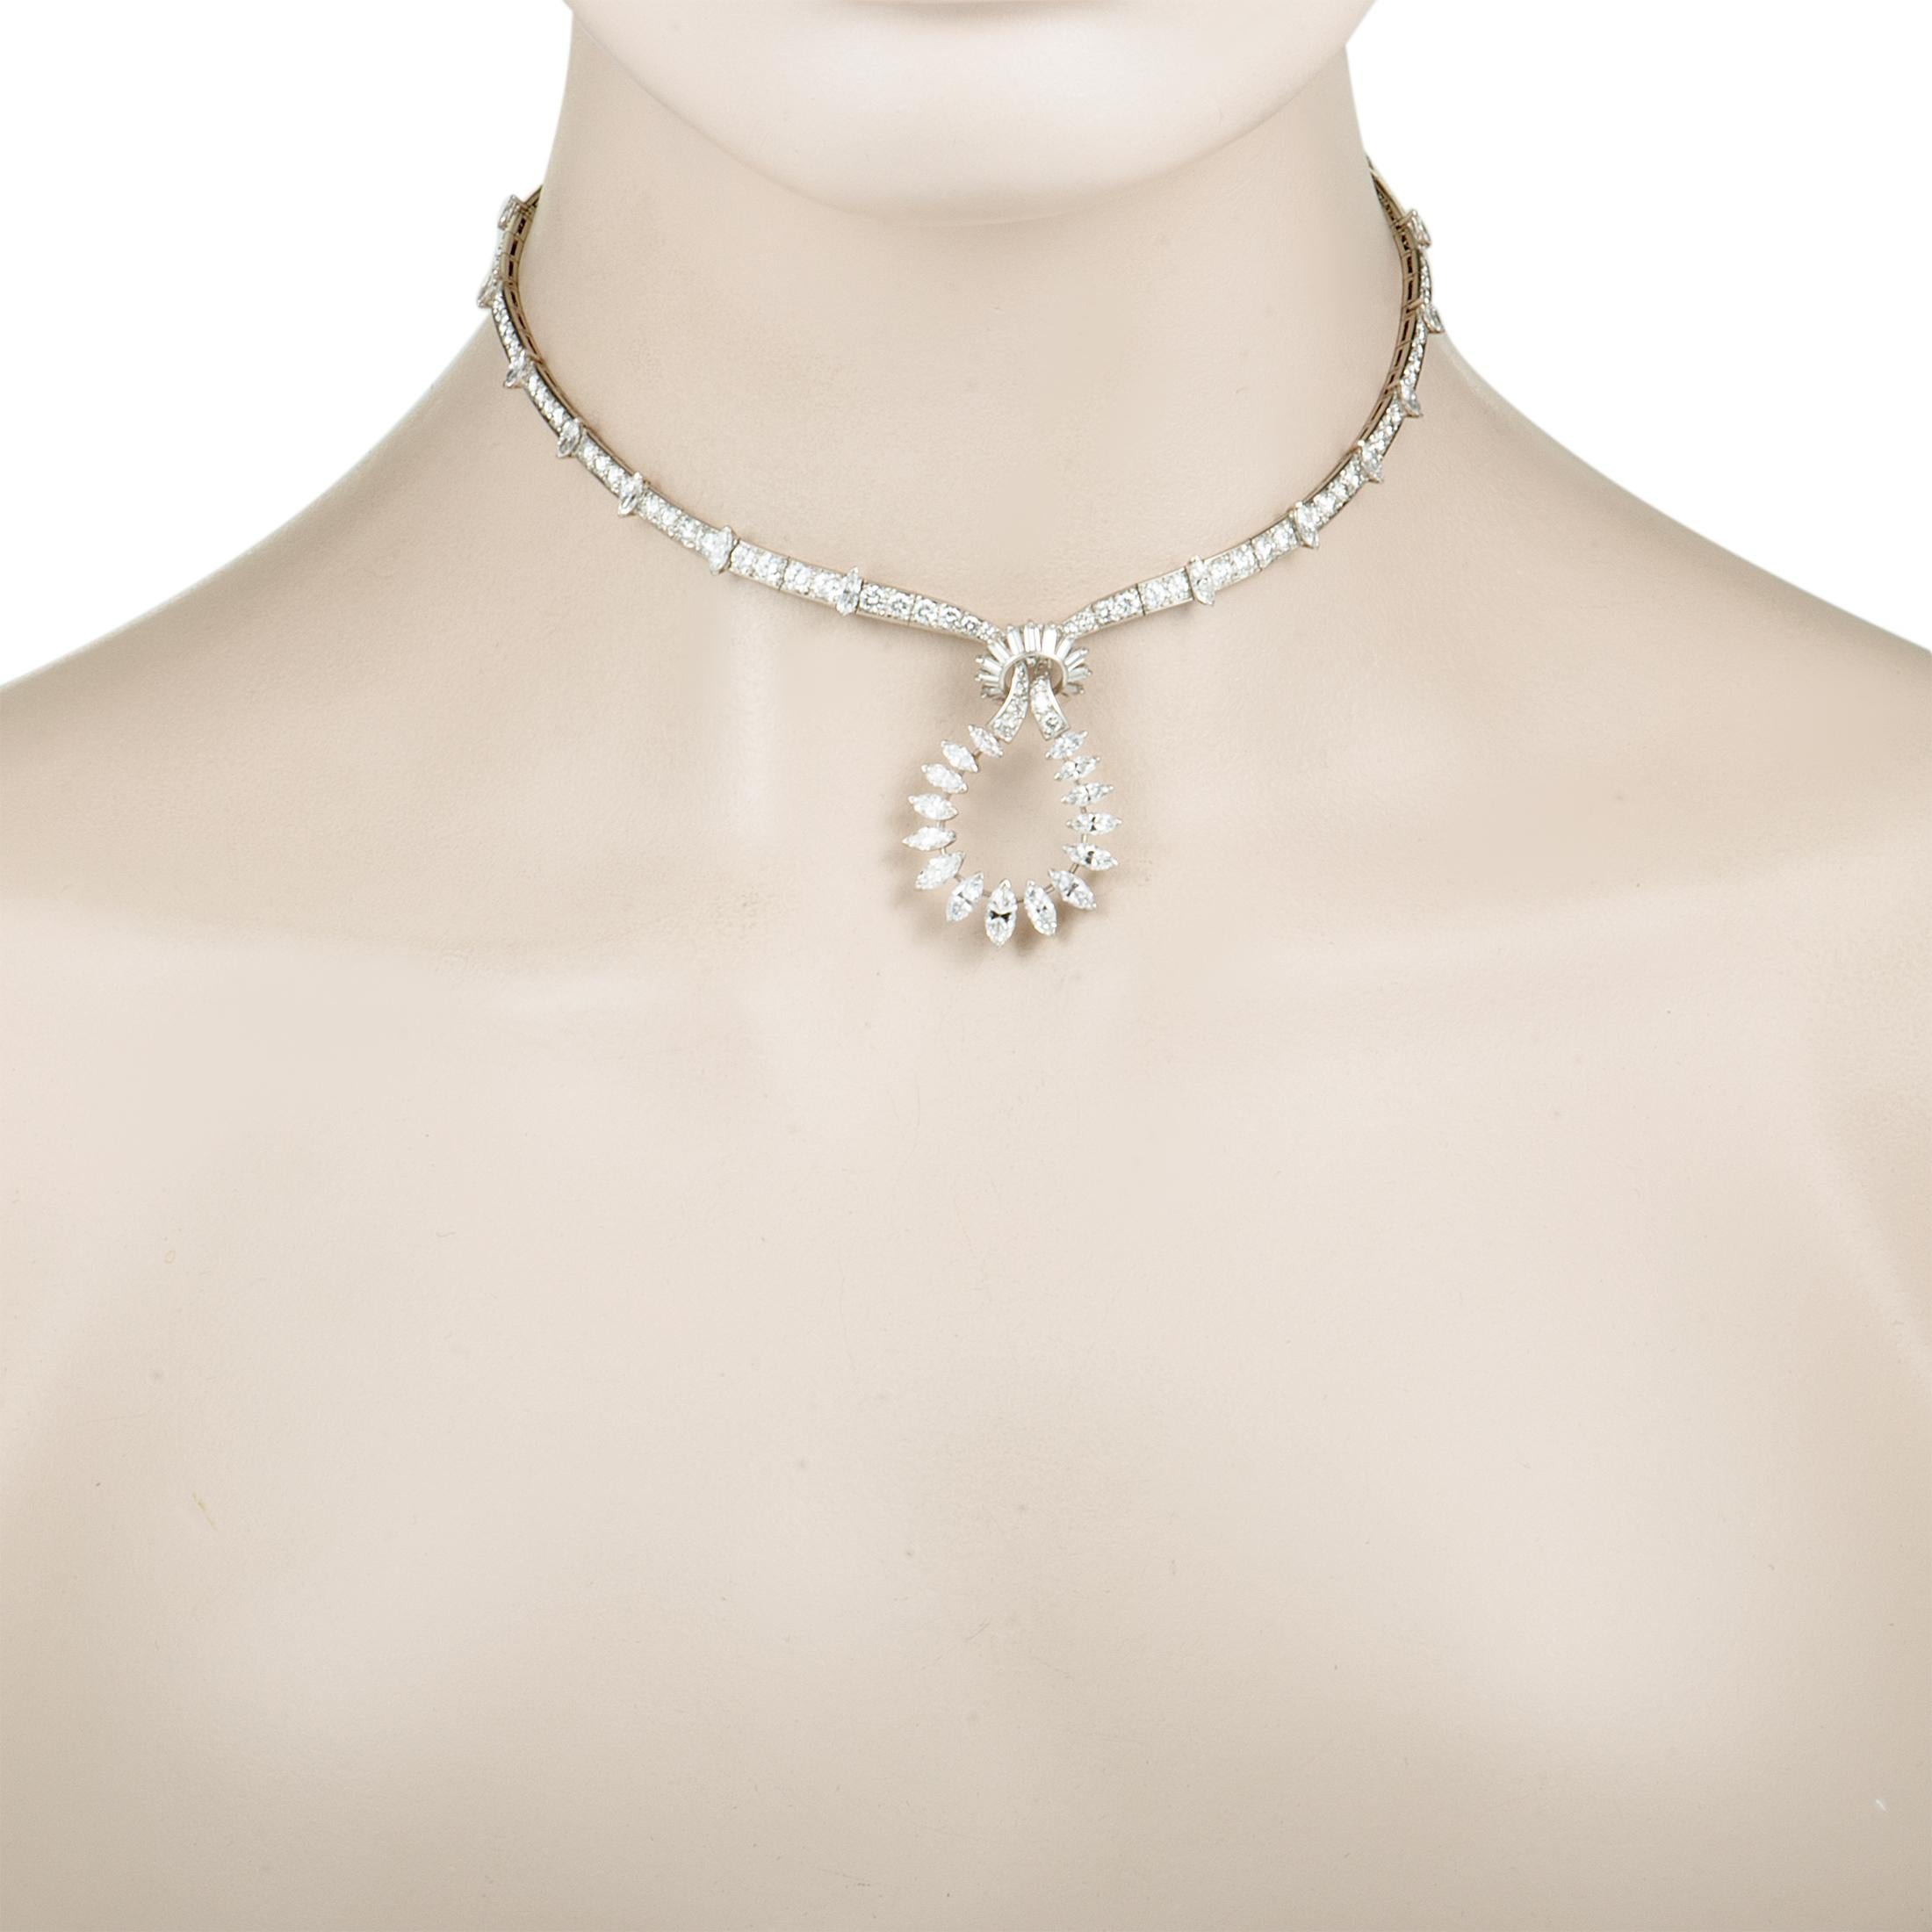 Embodying the very essence of refined extravagance, this wonderful Boucheron necklace will add a splendidly sophisticated touch to any ensemble of yours. This vintage piece is exquisitely crafted from prestigious platinum and it is decorated with a